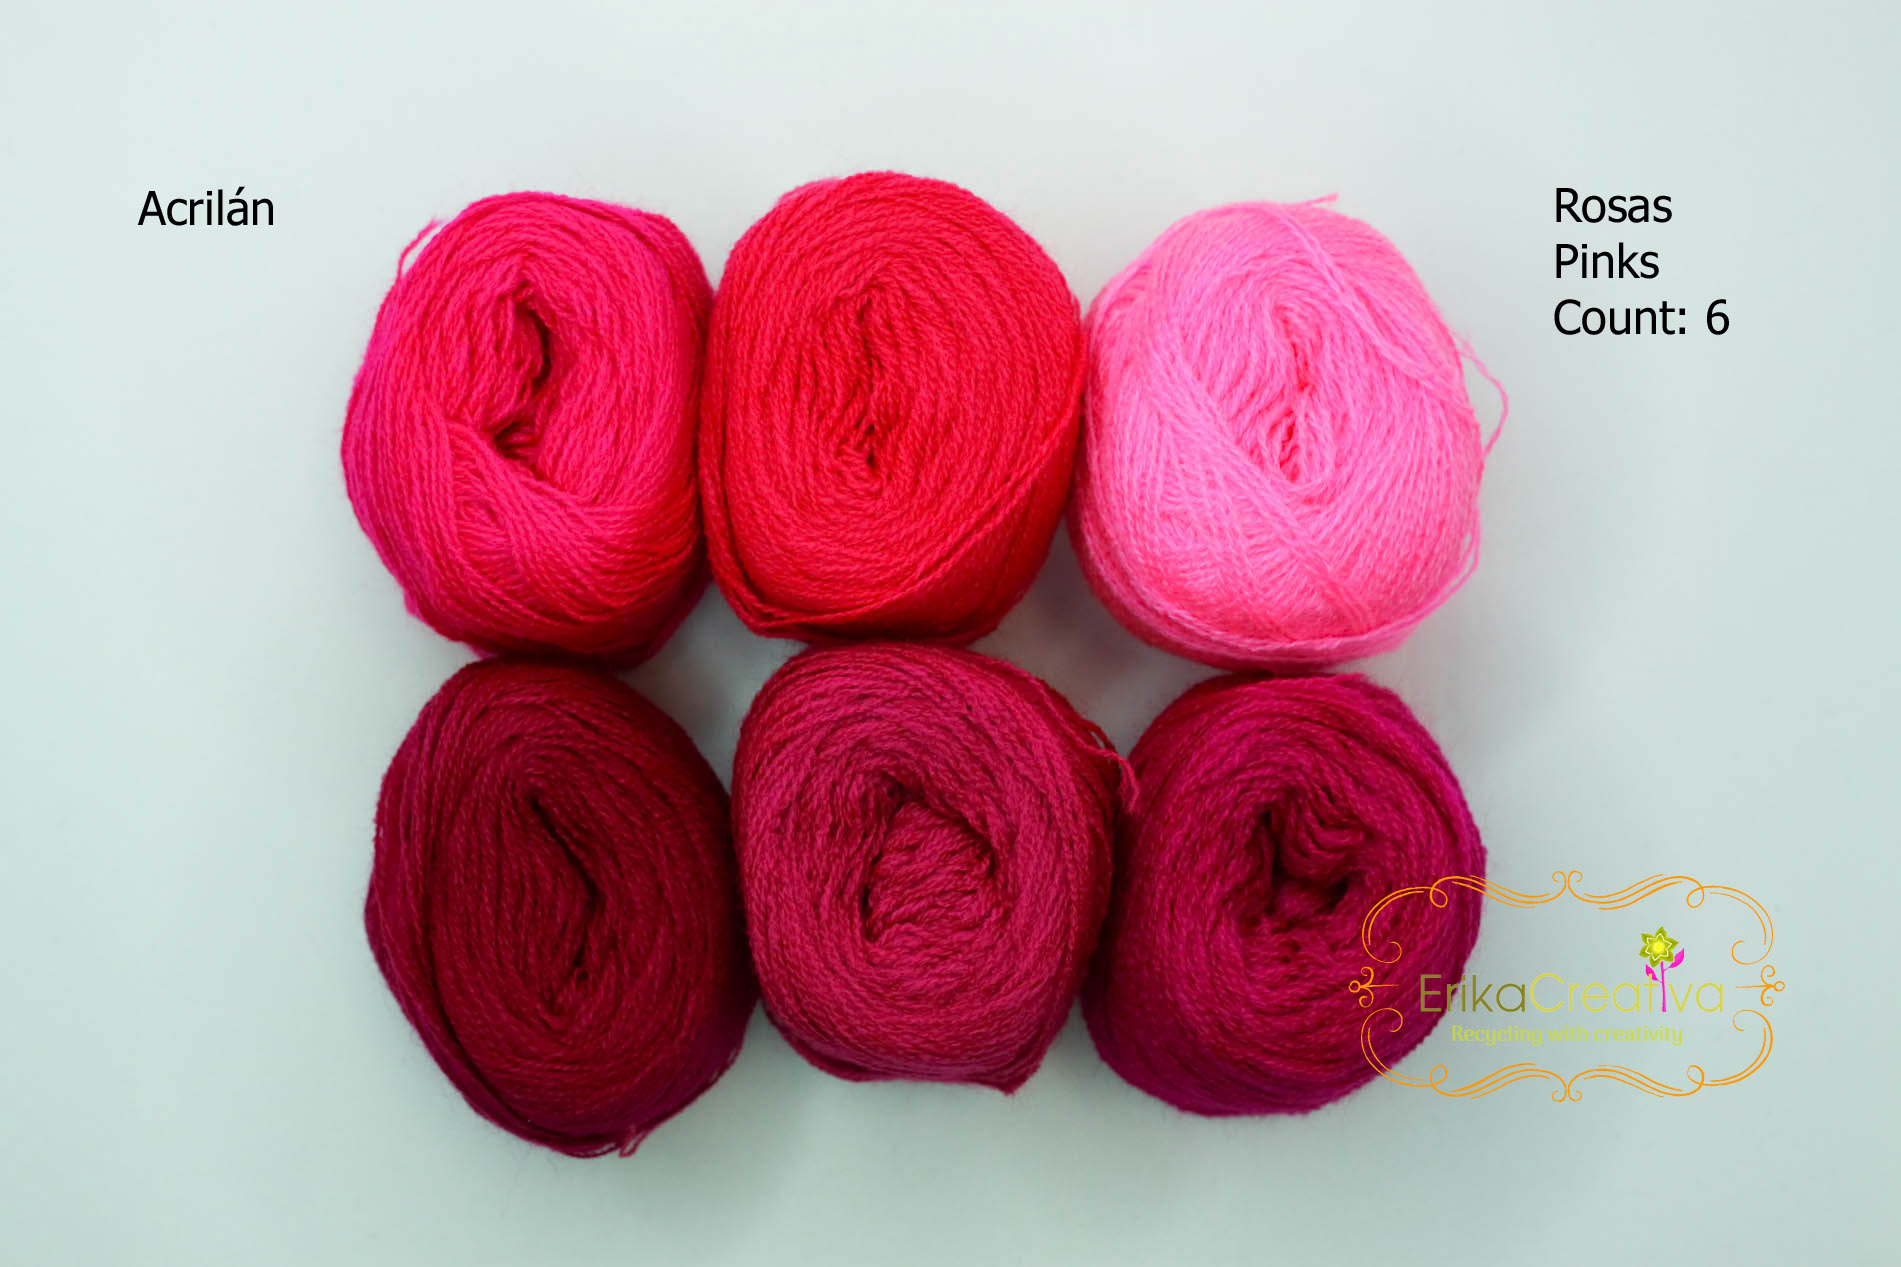 ACRILAN 3 HEBRAS [Multicolor Pack] - 15grs 12-Pack of 3-thread yarn for  crafts